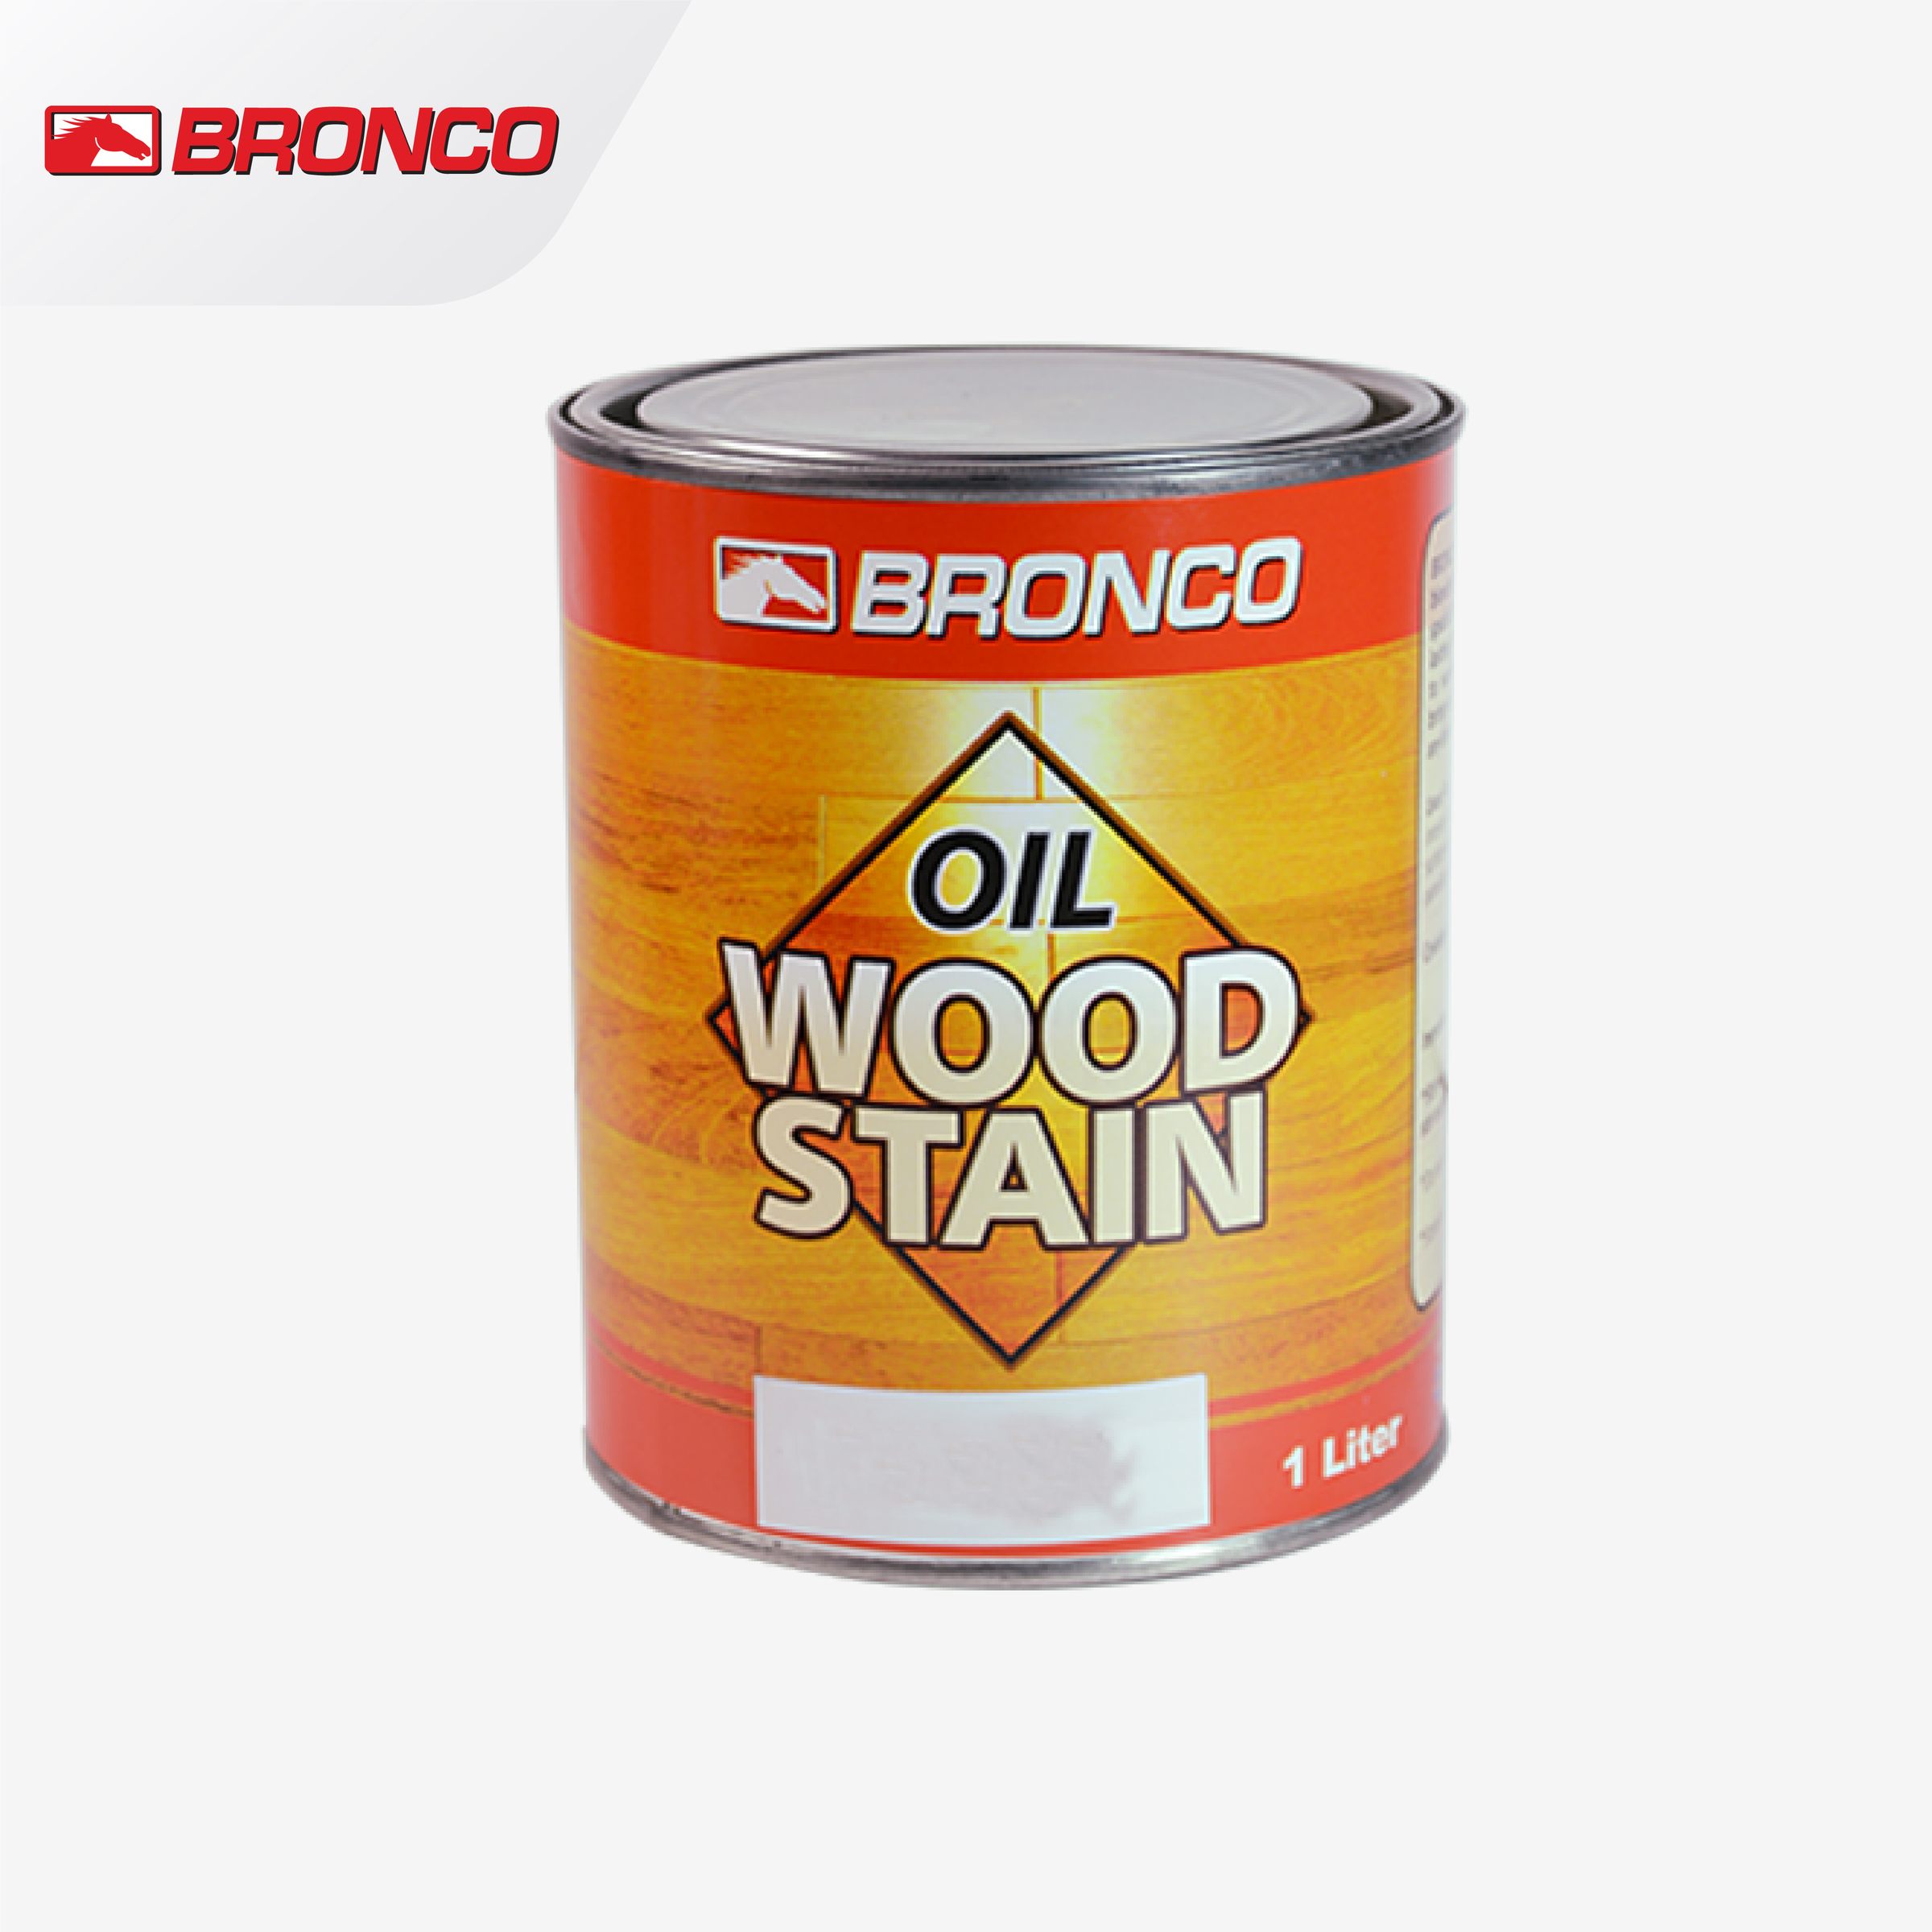 Bronco Oil Wood Stain - 1L